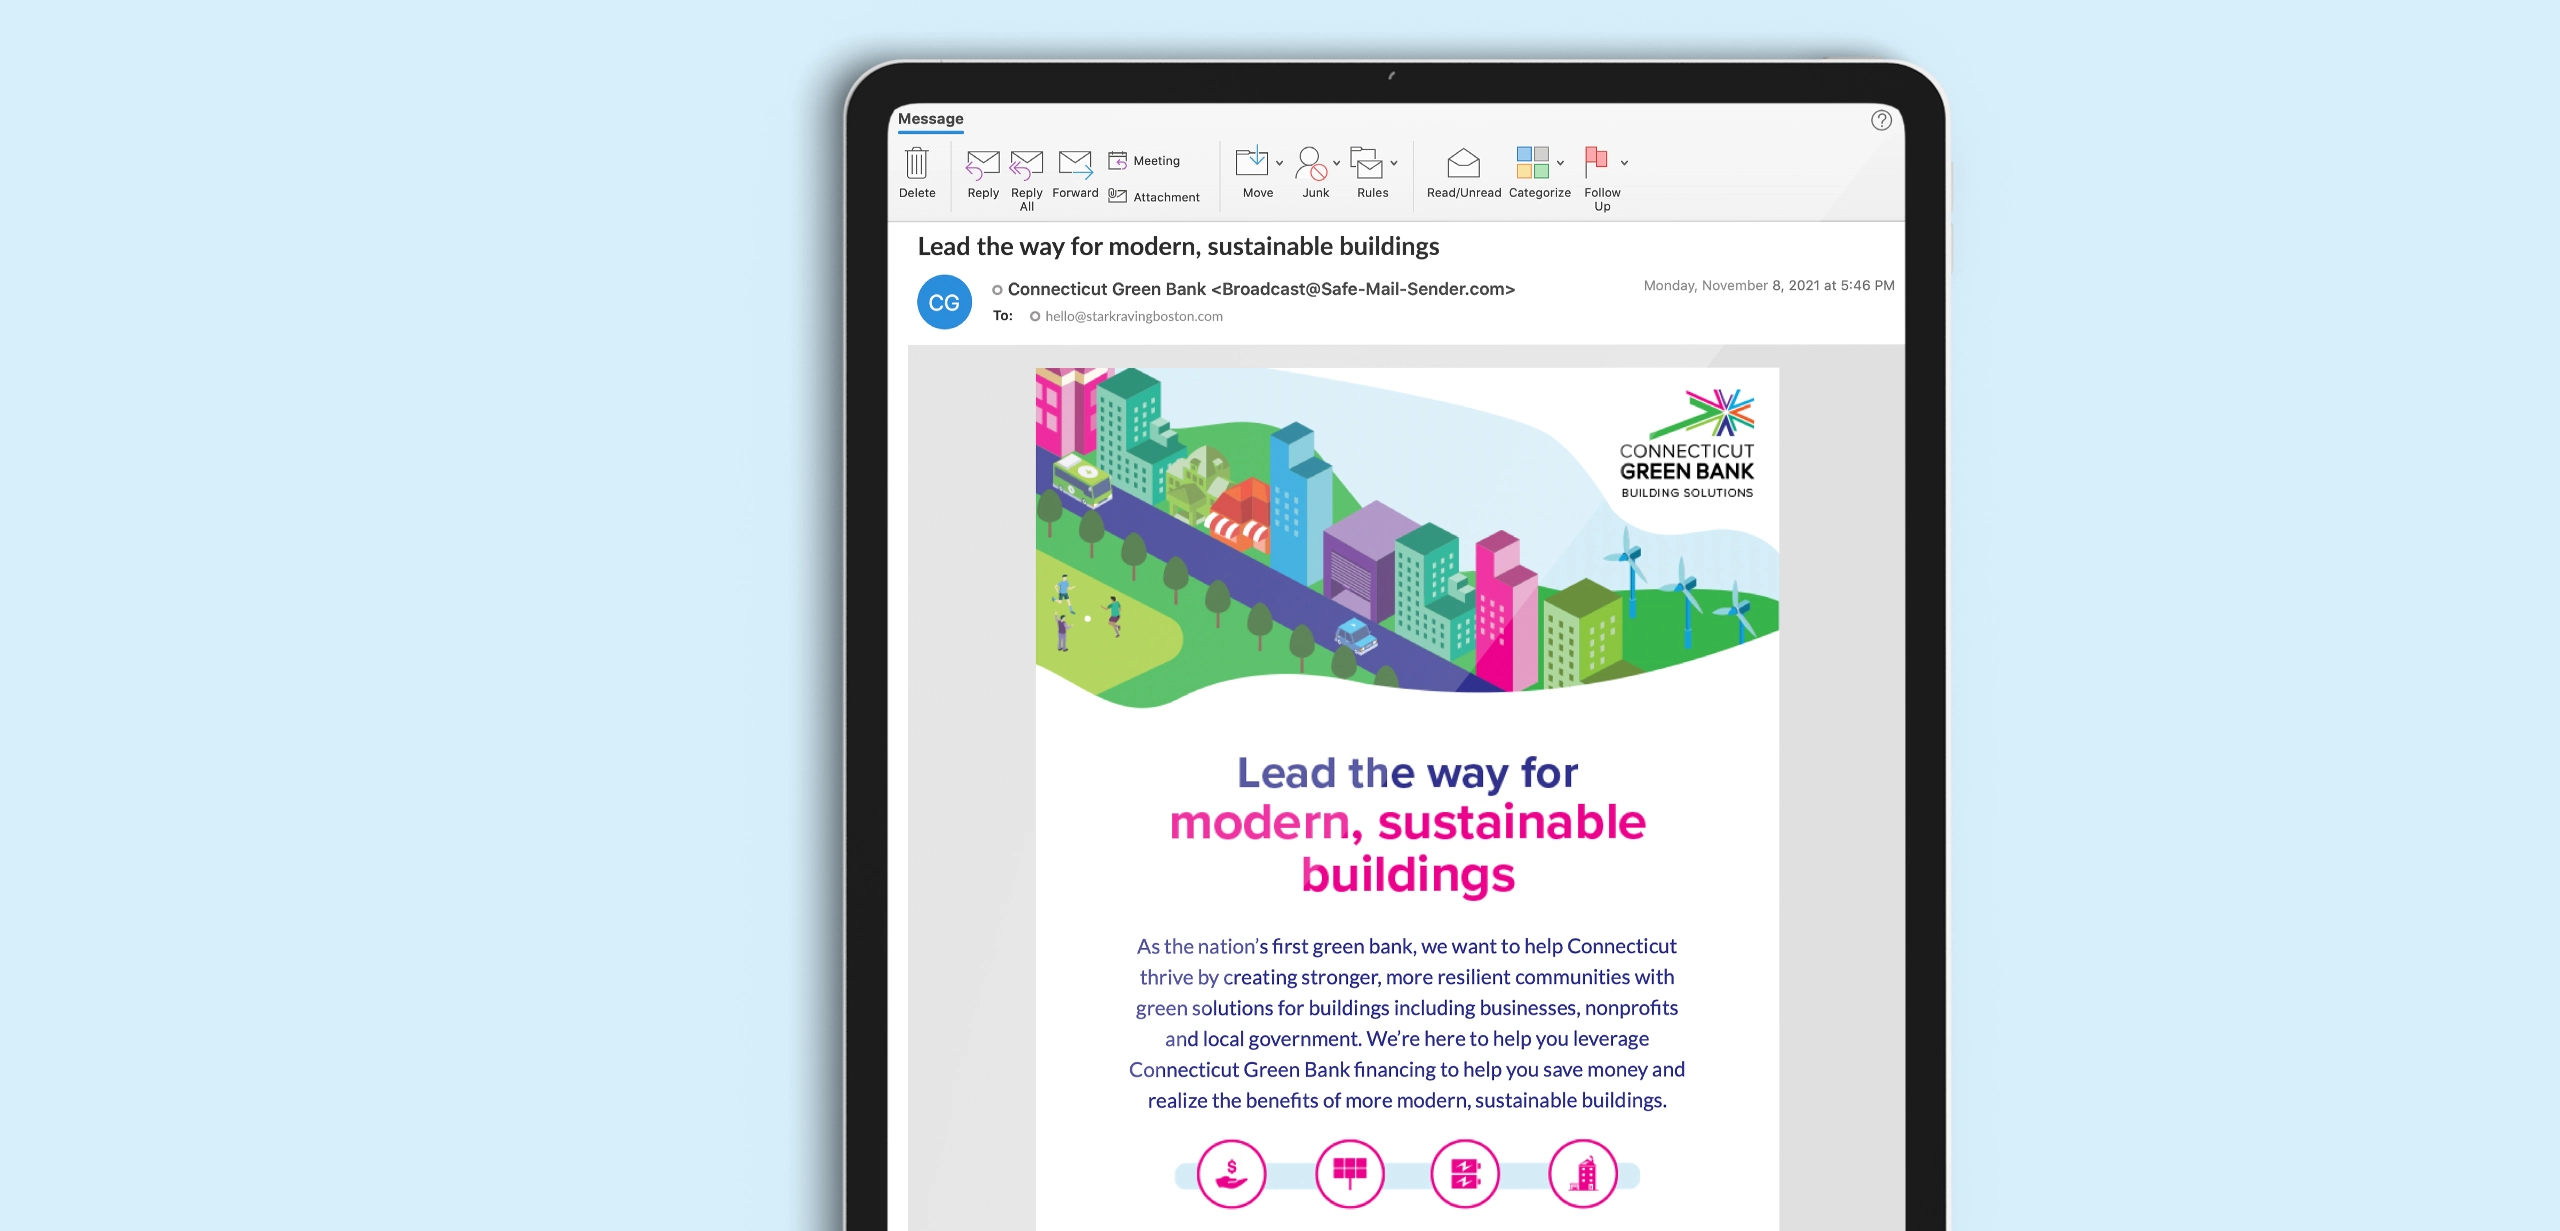 Email drip campaign for regional clean energy improvement funding company targeting building owners